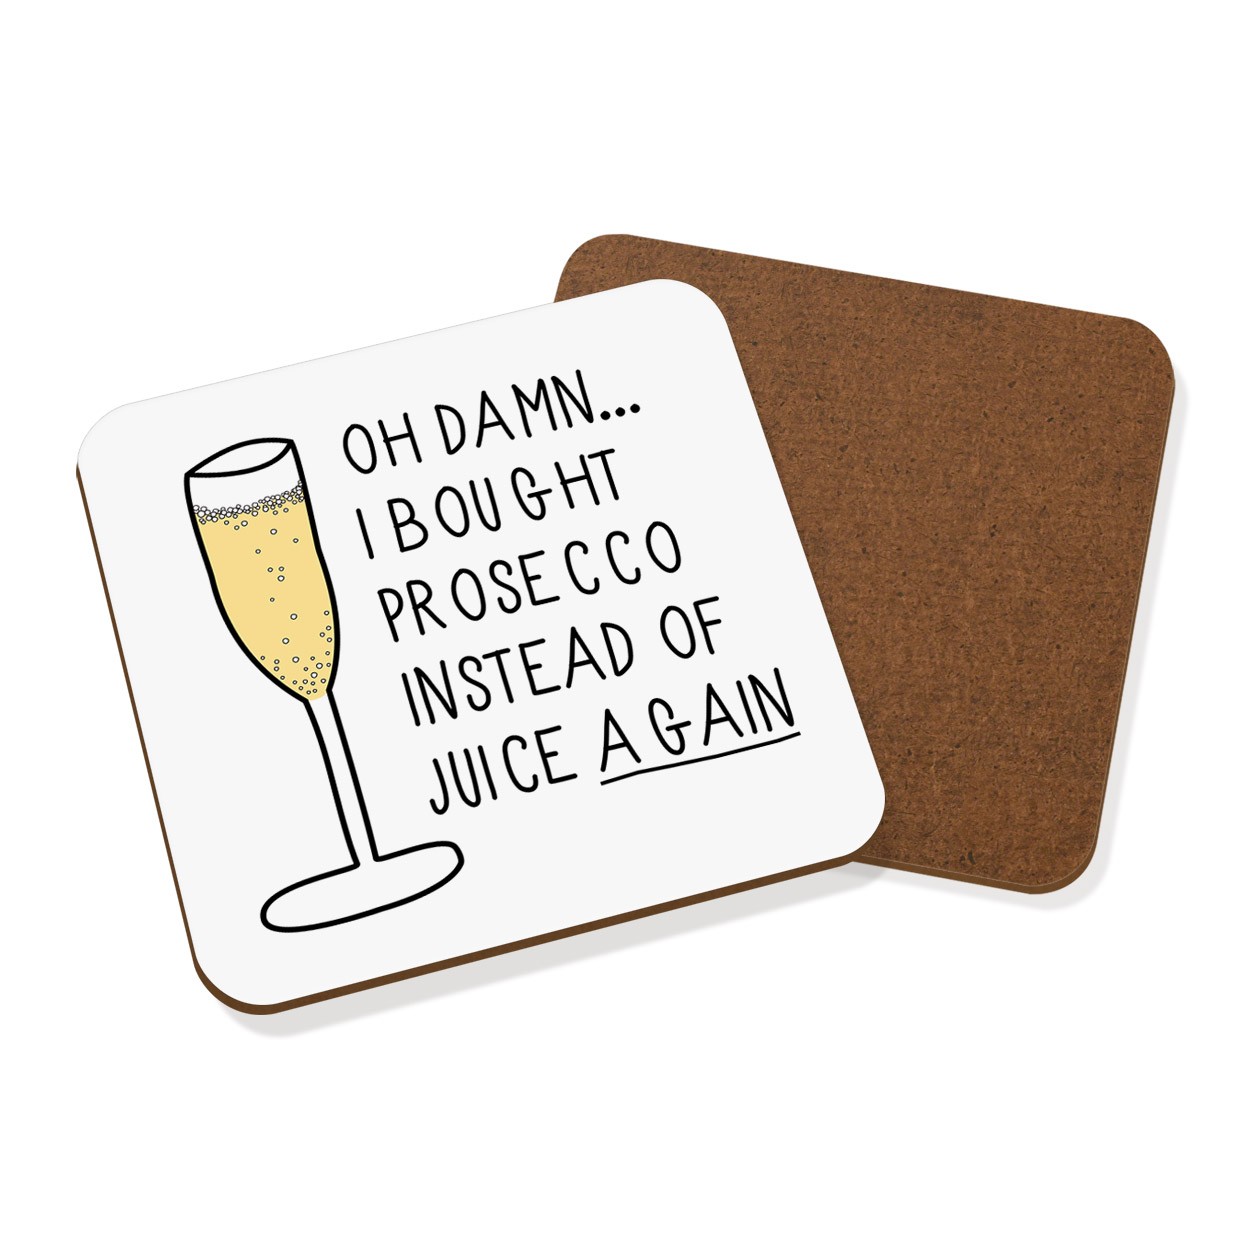 Oh Damn I Bought Prosecco Instead Of Juice Again Coaster Drinks Mat